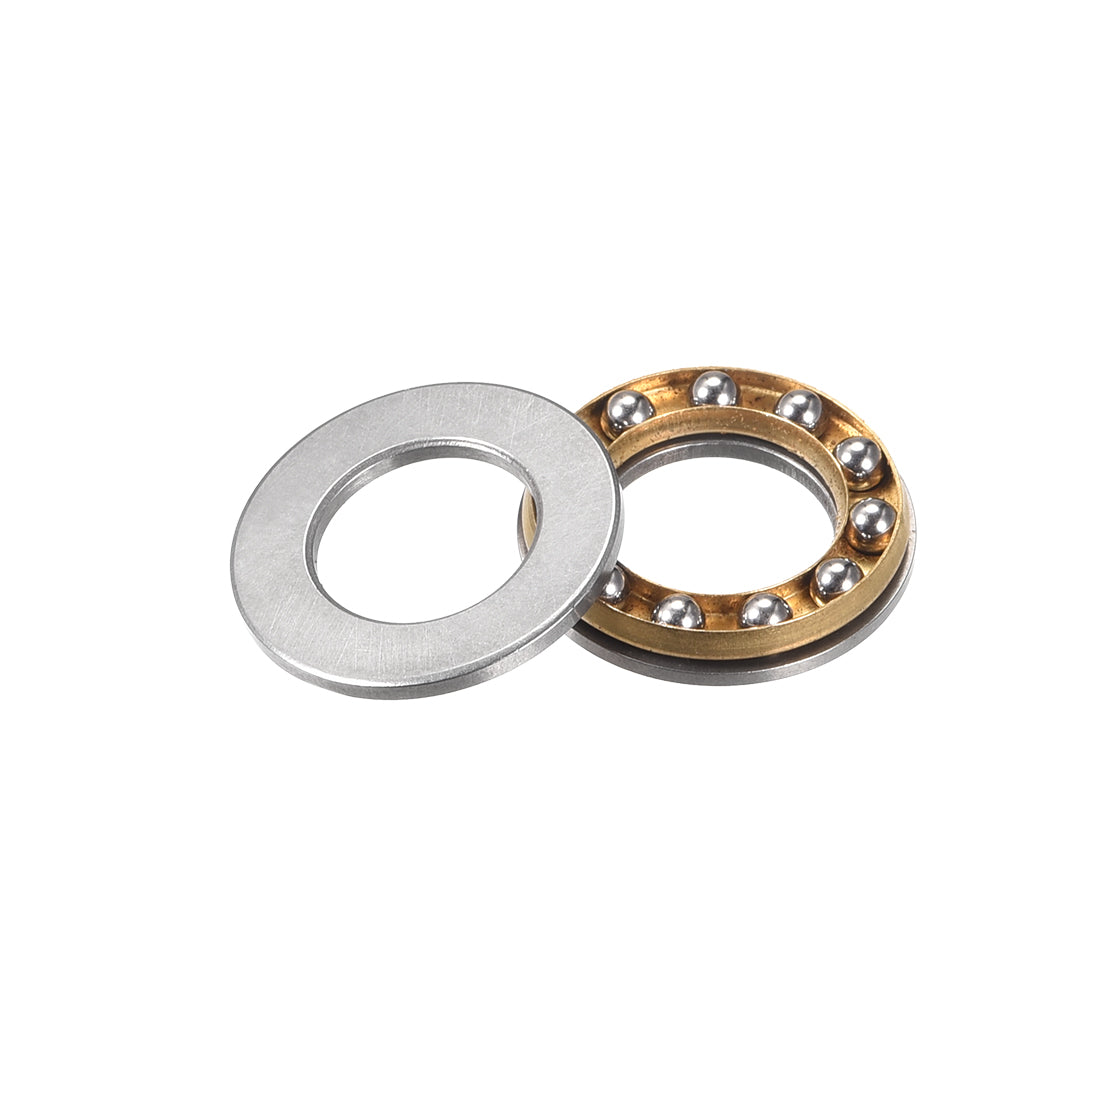 uxcell Uxcell F12-21M Miniature Thrust Ball Bearings 12x21x5mm Chrome Steel with Washers 2 Pcs